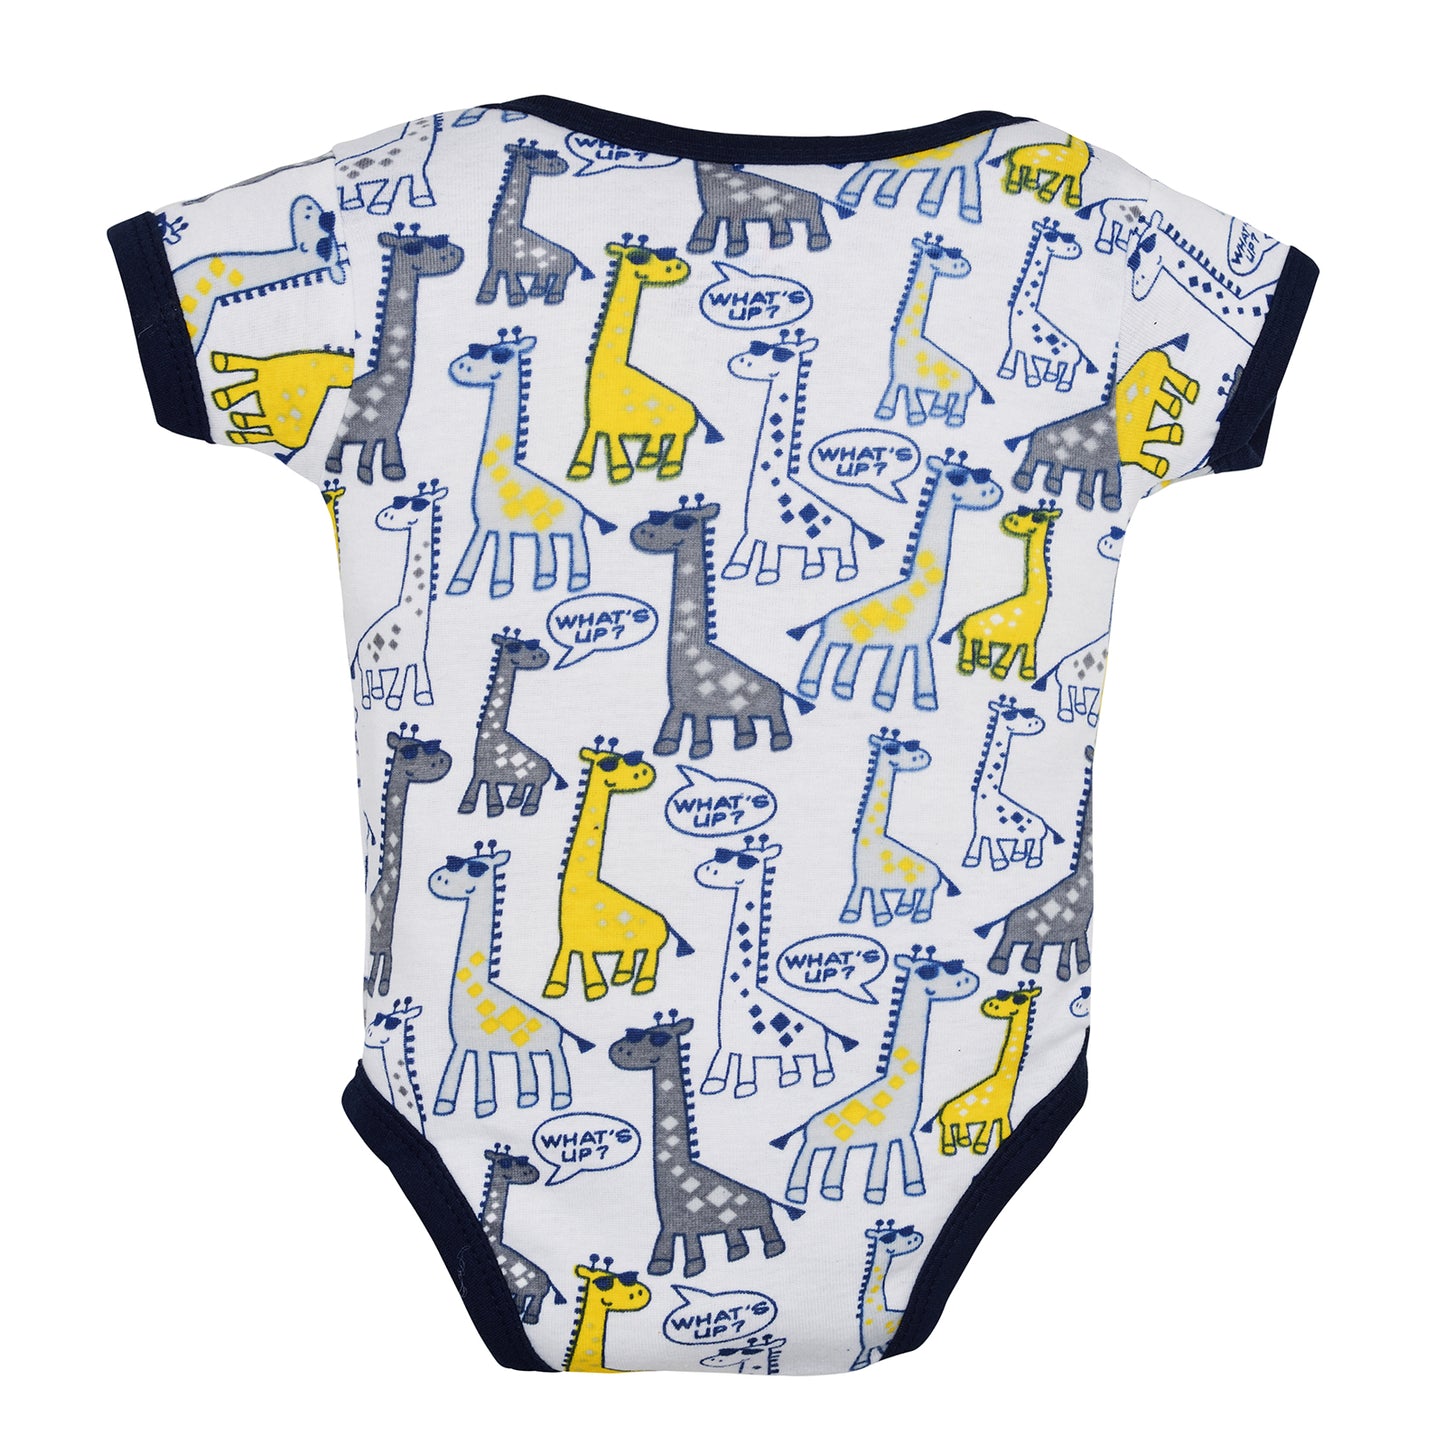 Bodice Half Sleeves Baby Romper Body Suits Jump Suit for Boys and Girls Set of 3 (Navy Blue)